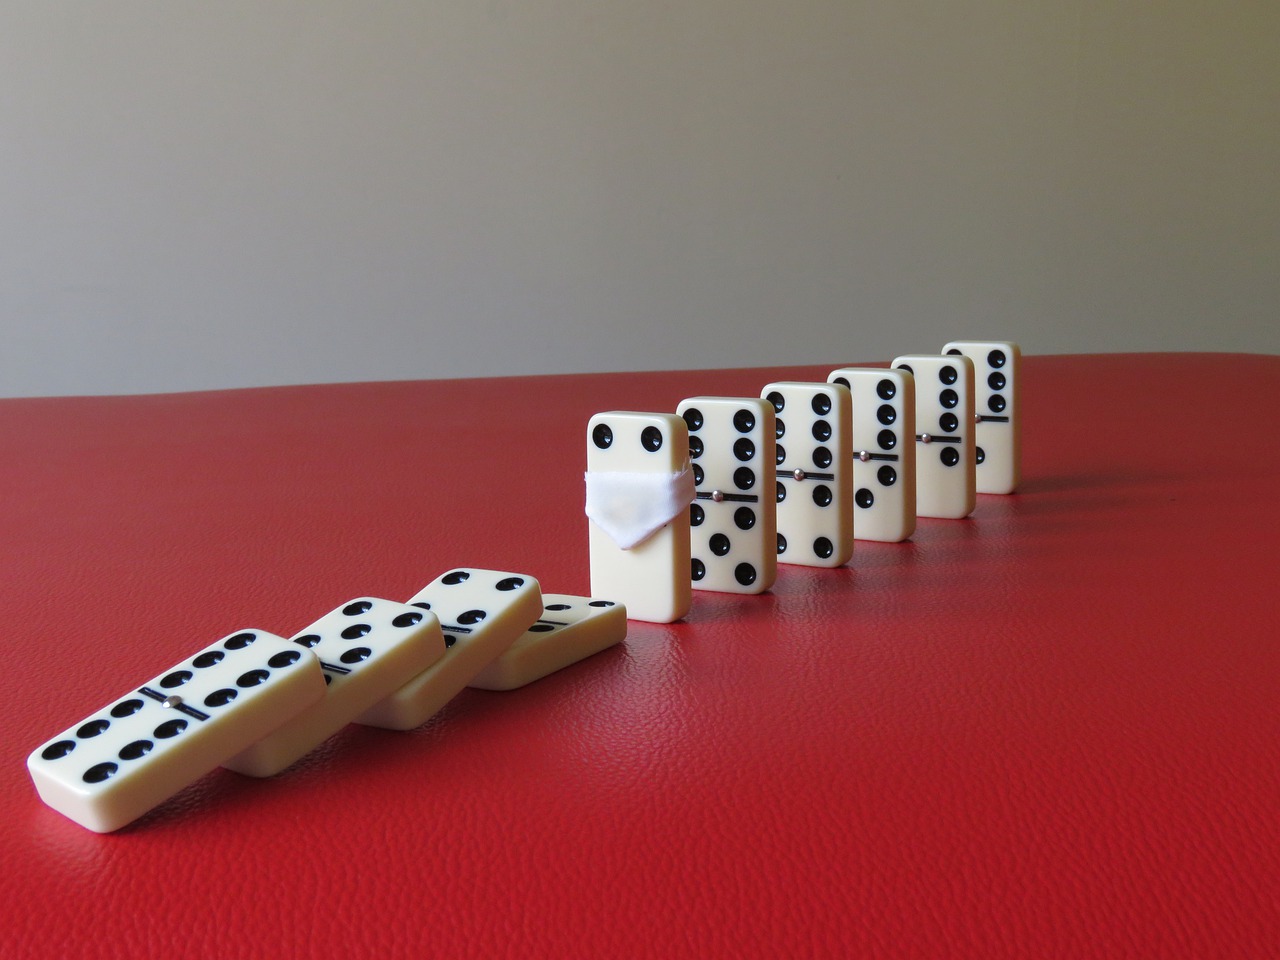 COVID-19 Business Update - 7 September 2020 - a line of fallen dominoes is stopped by a domino wearing a face mask